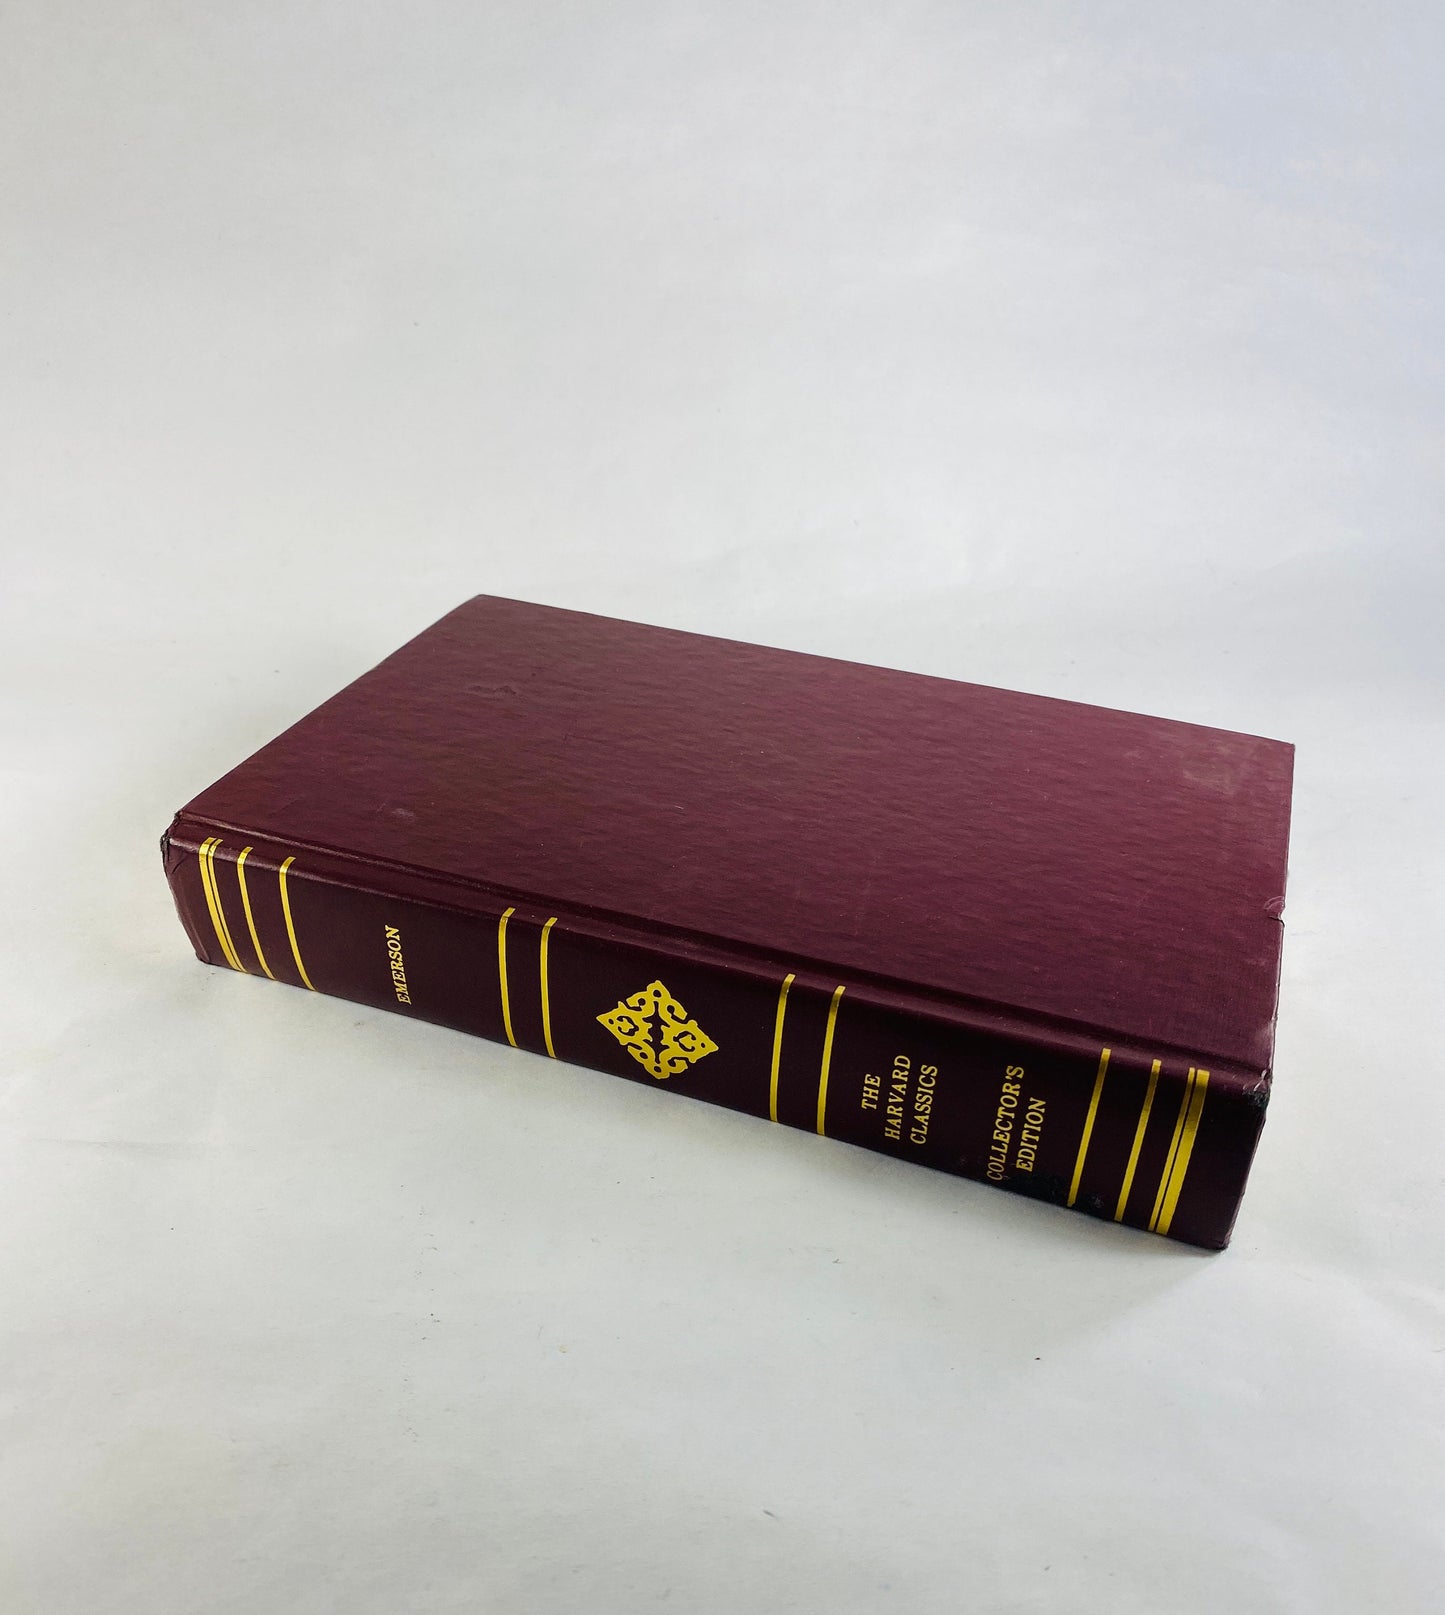 Emerson vintage Harvard Classics book philosophy maroon red with 22kt gold gilded lettering gift